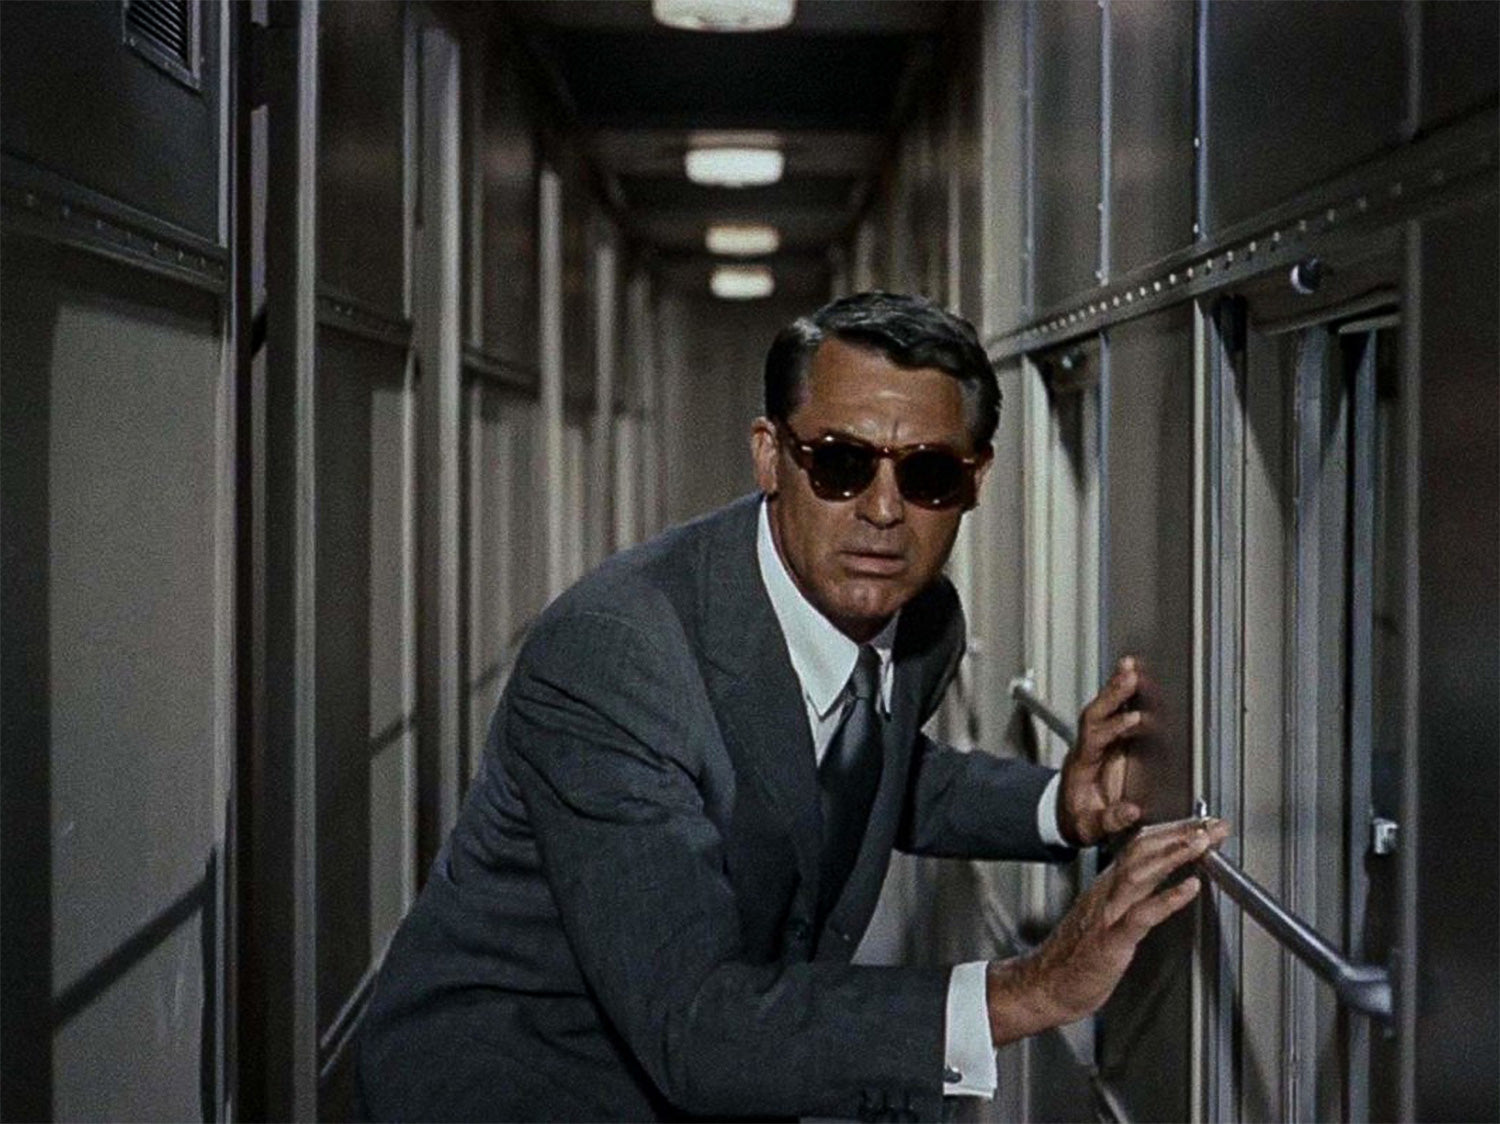 Cary Grant in a Grey Suit and Grey Tie in the movie North By Northwest